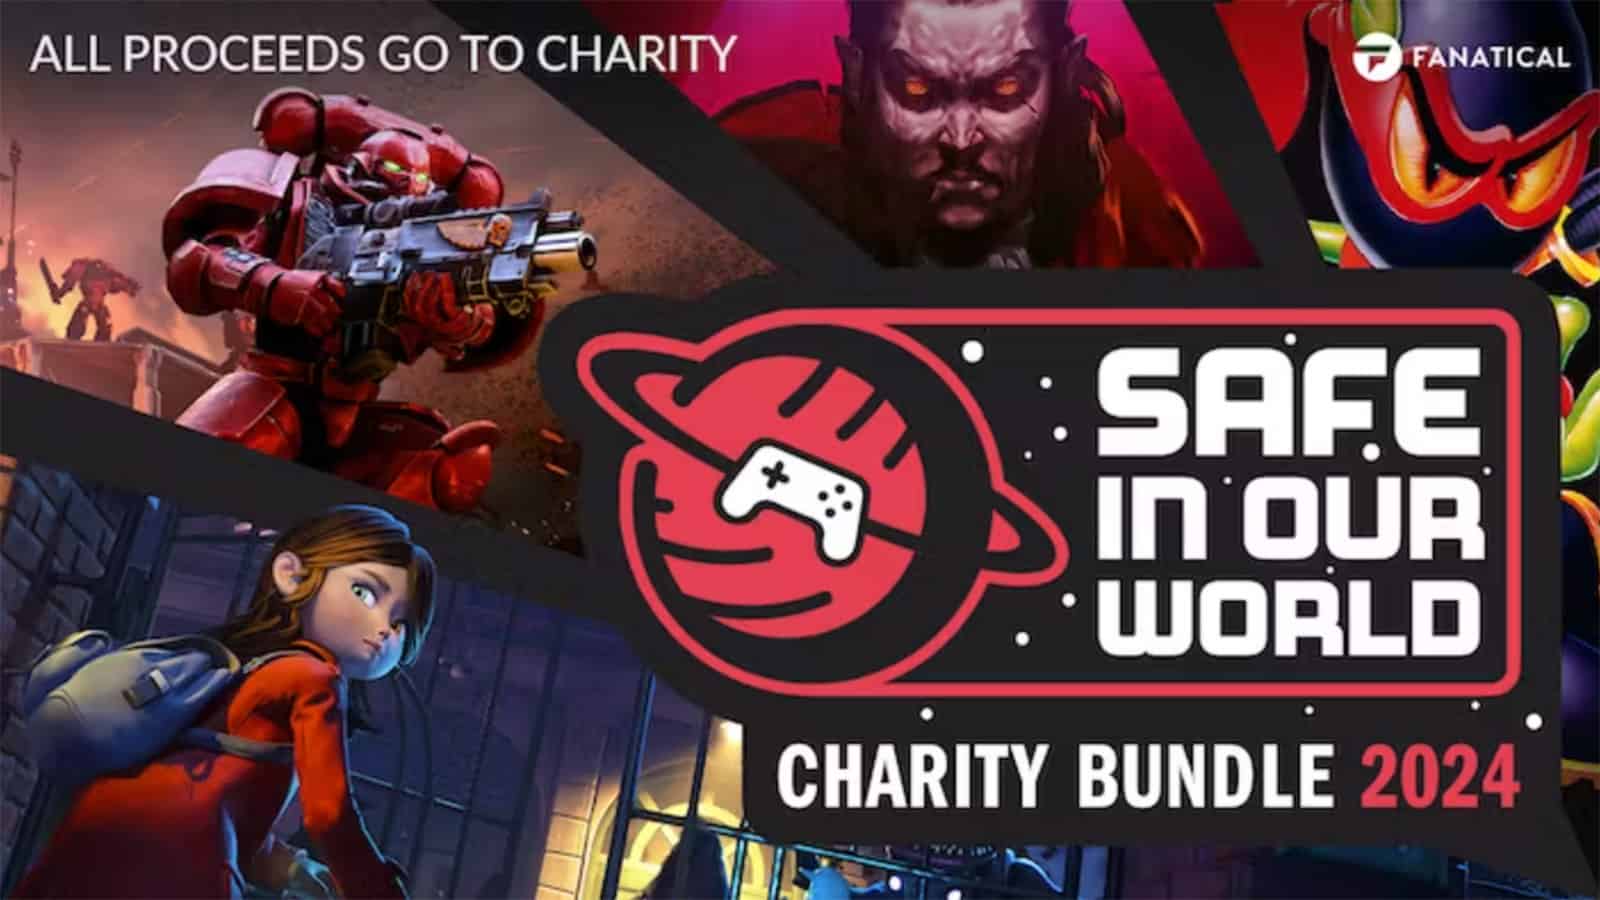 Charity Safe In Our World Launches 26-Game Bundle With Fanatical